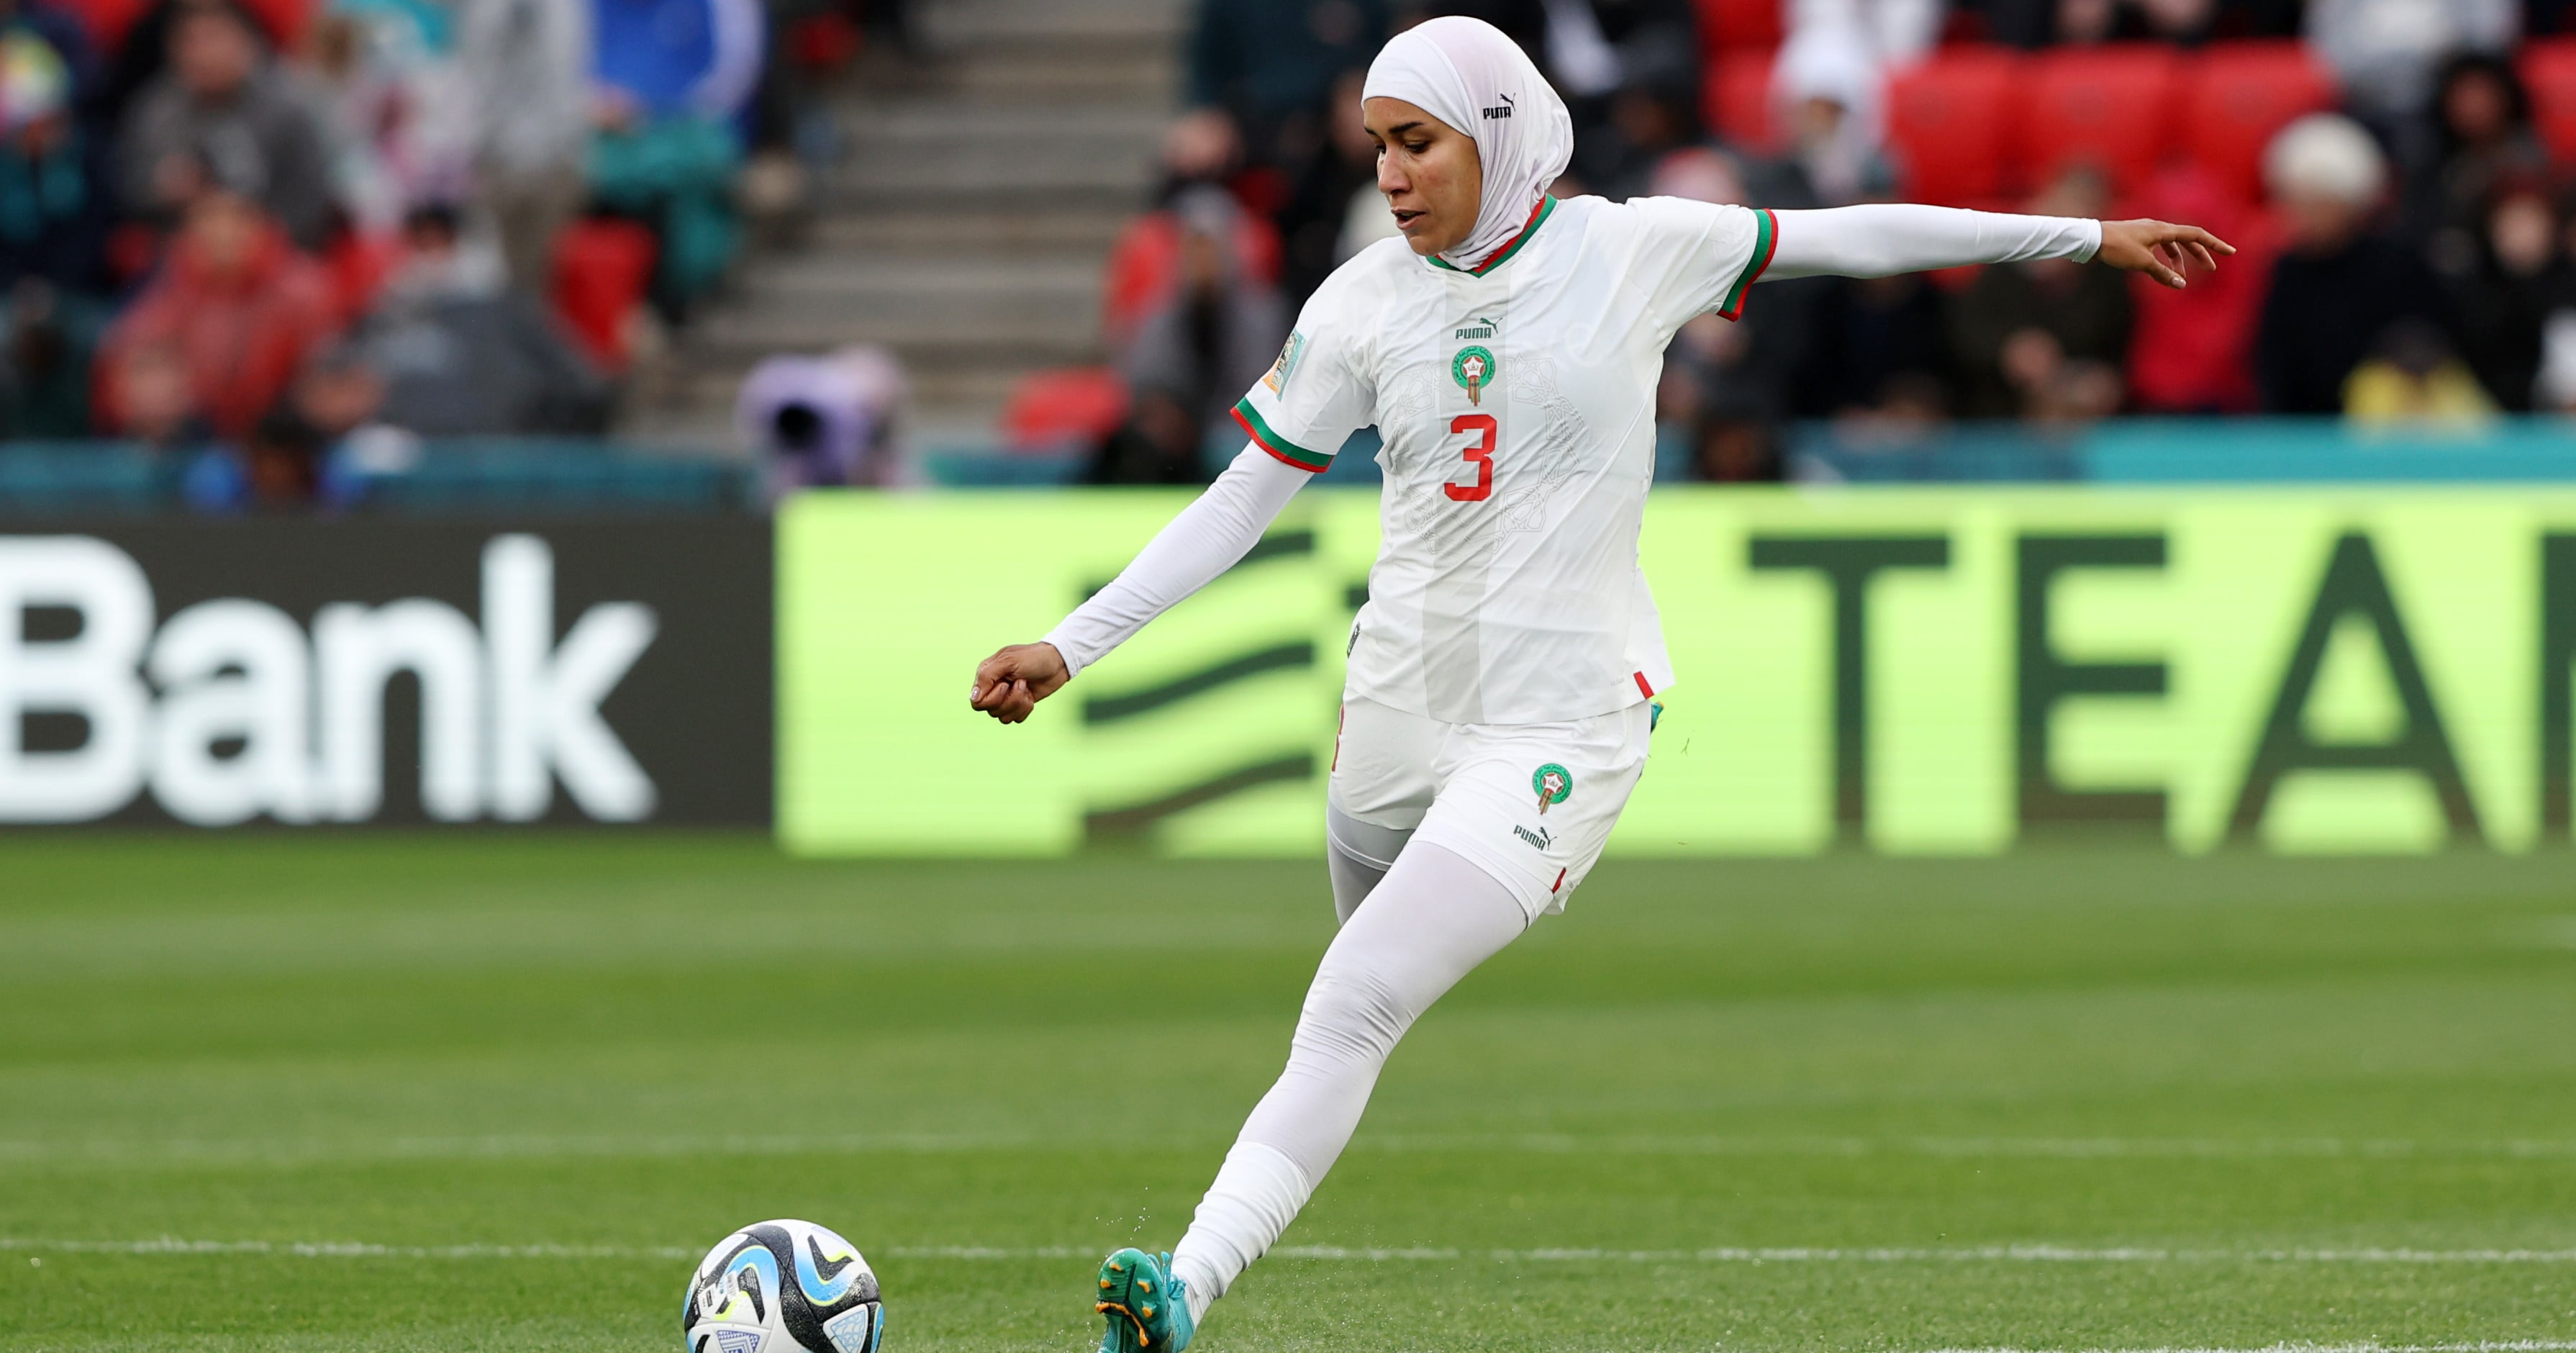 Morocco’s Nouhaila Benzina Makes World Cup History as First Athlete to Play in a Hijab